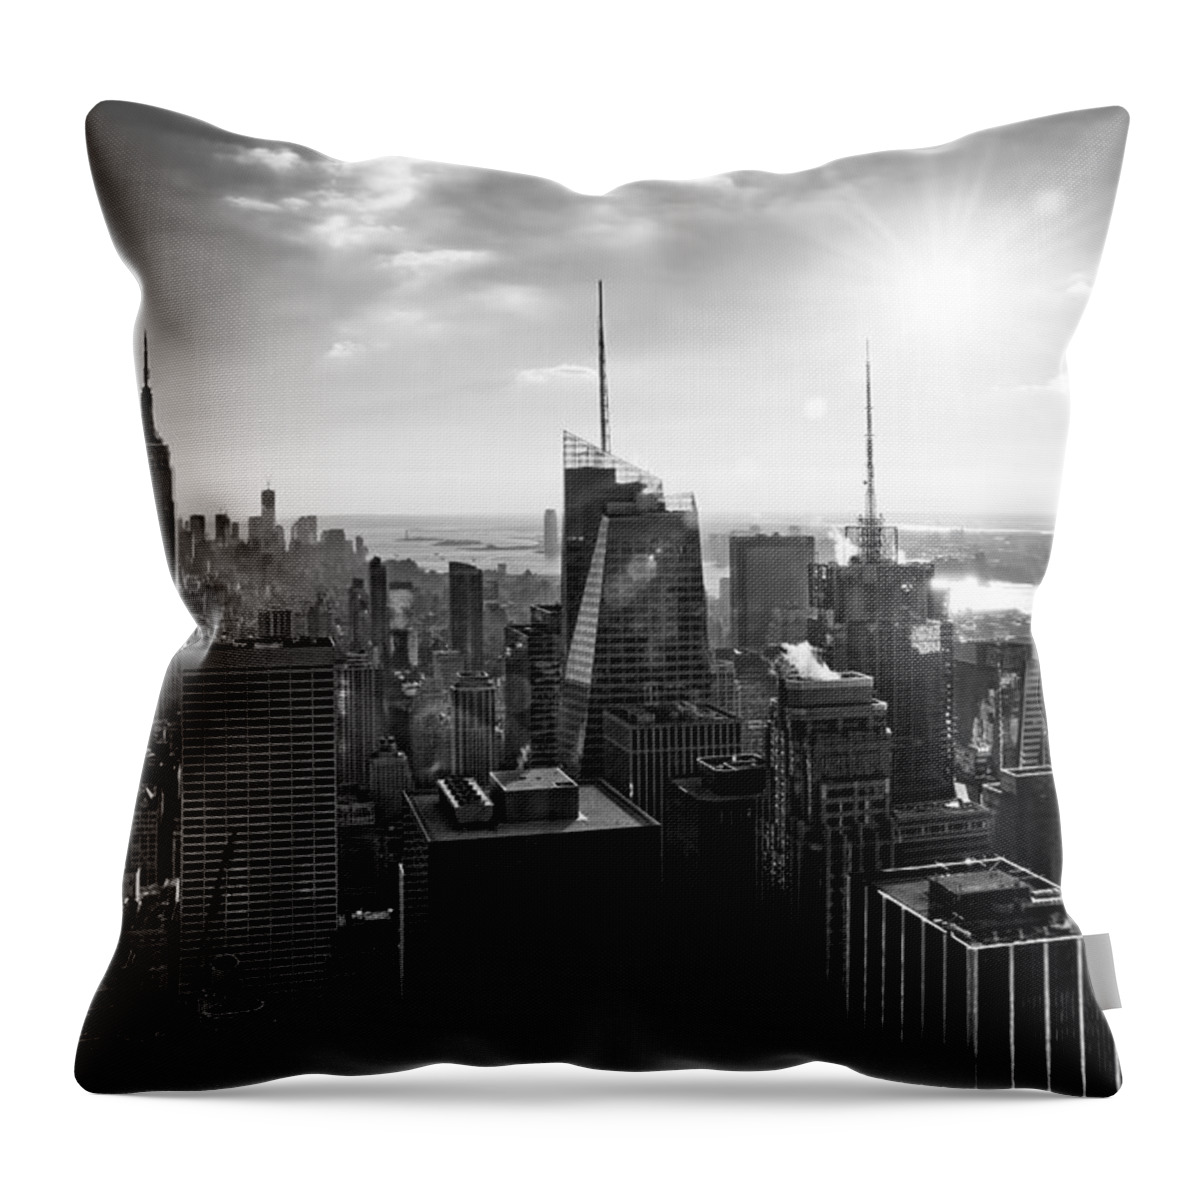 Black And White Throw Pillow featuring the photograph Midtown Skyline Infrared by S Paul Sahm